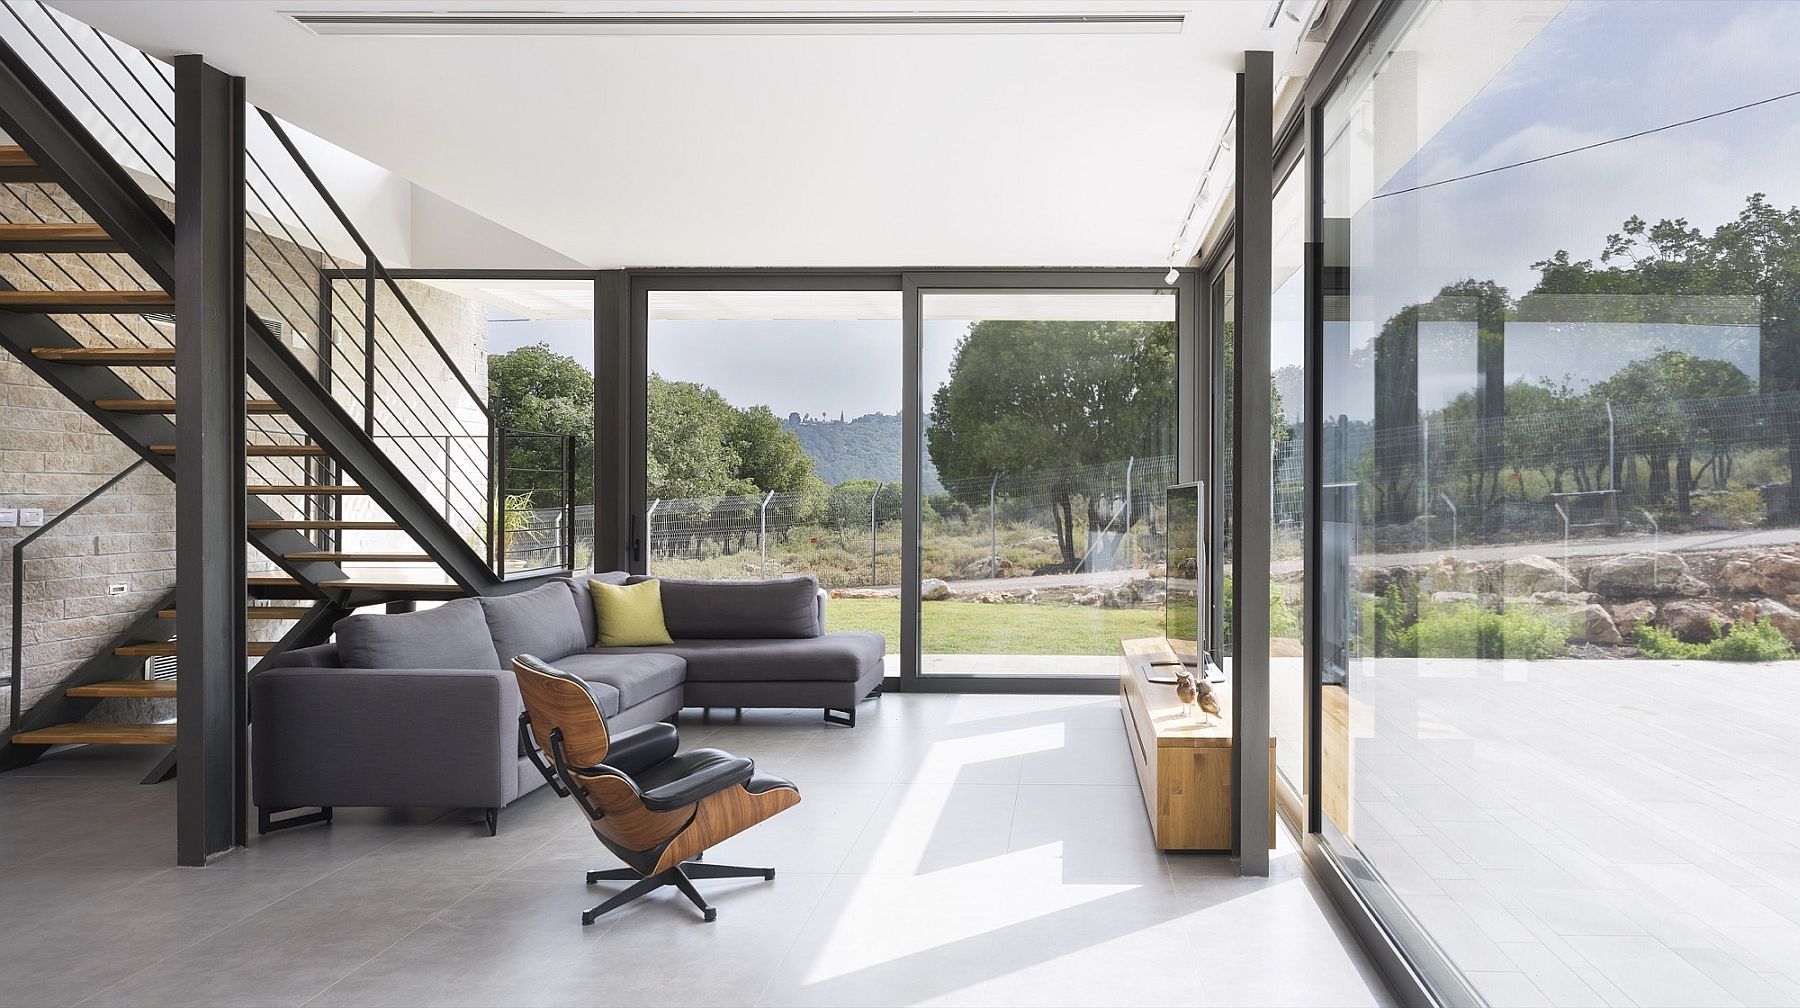 Sliding glazed doors connect the interior with the view outside